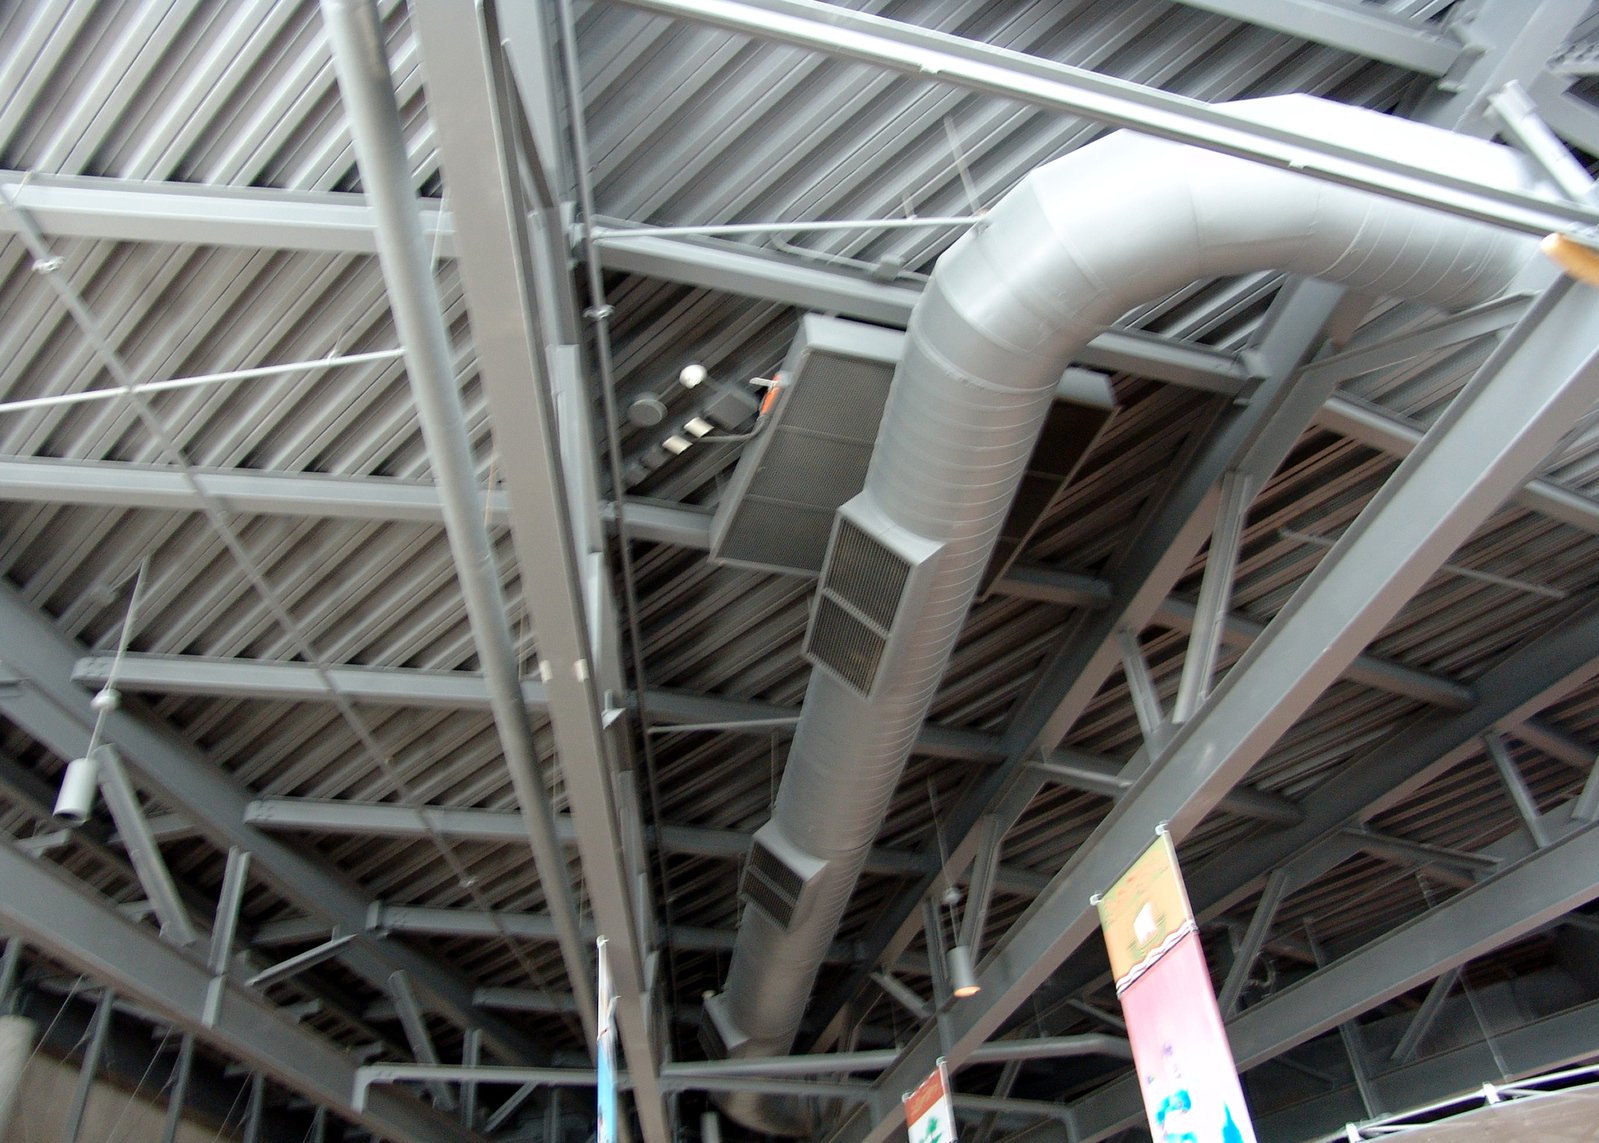 large silver pipes are shown on the ceiling in the building